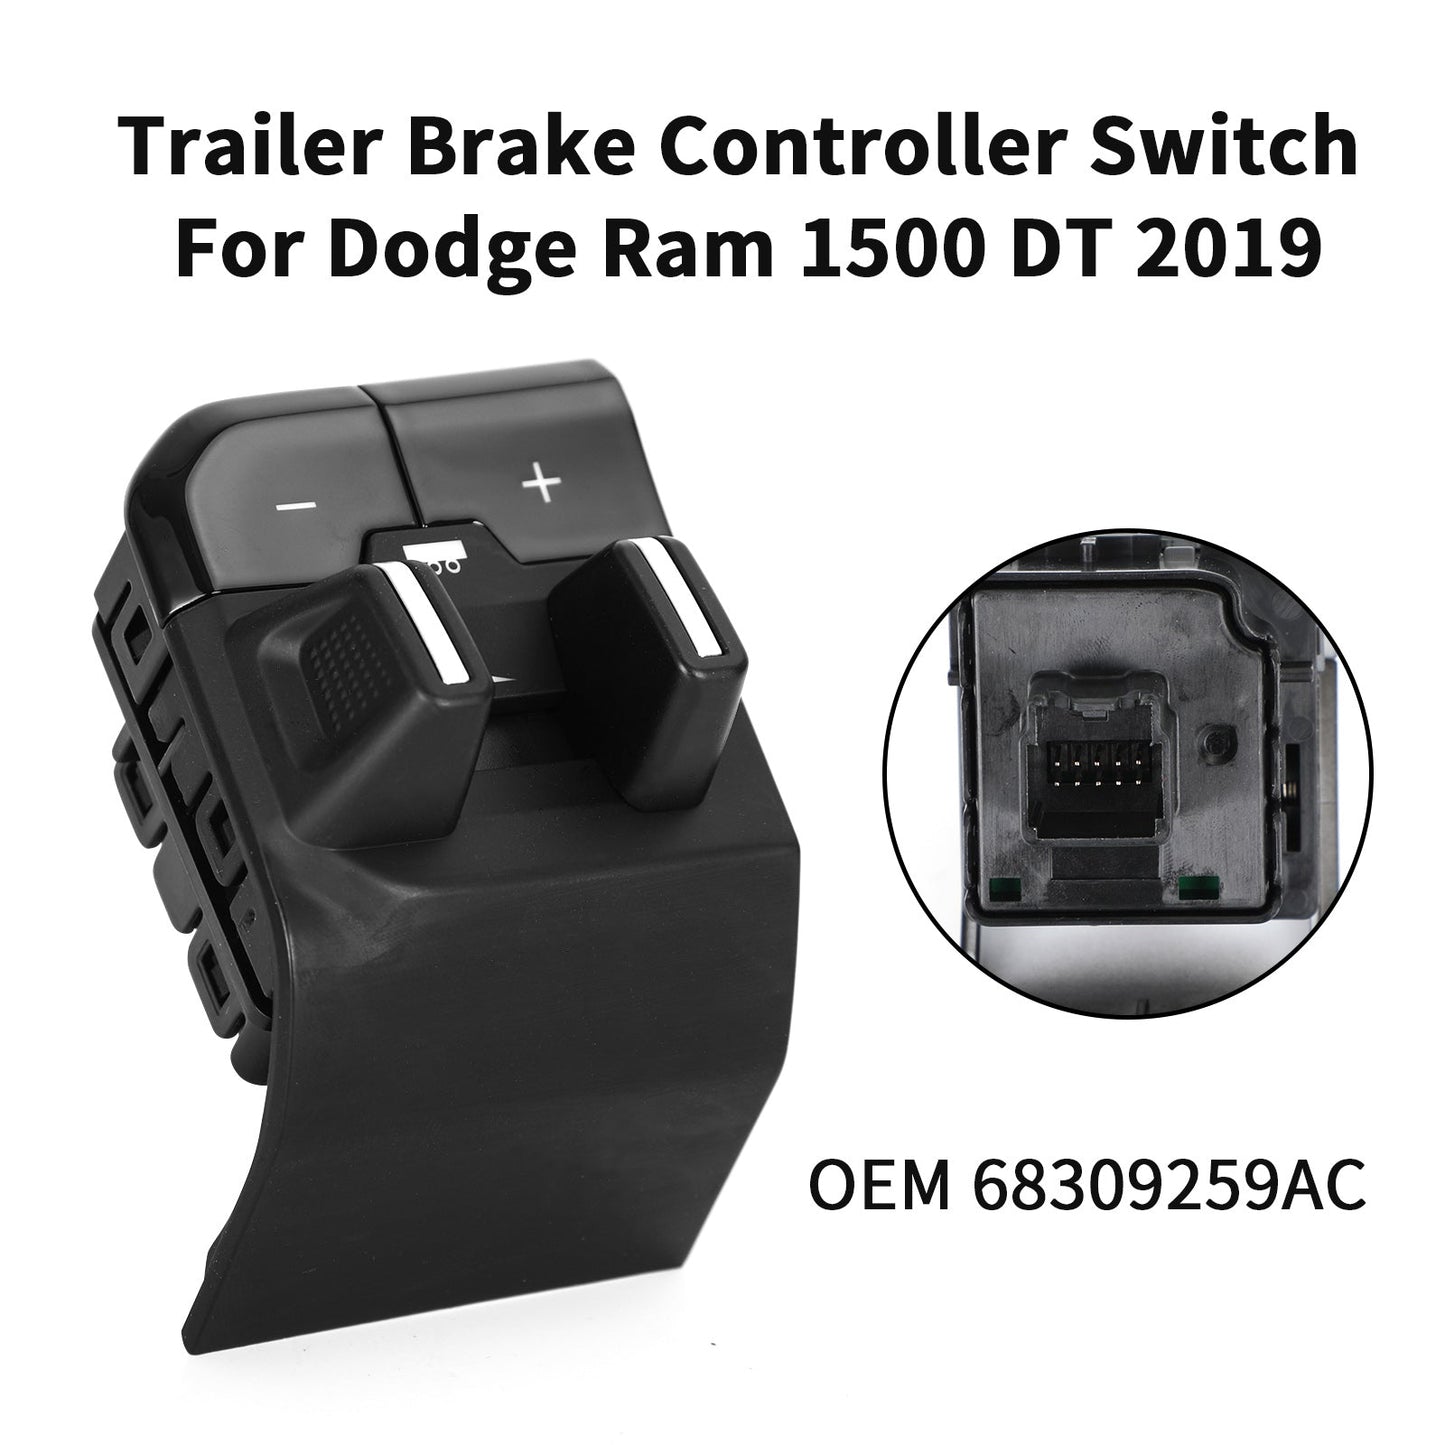 New Trailer Brake Controller Switch For Dodge Ram 1500 DT 2019 68309259AC